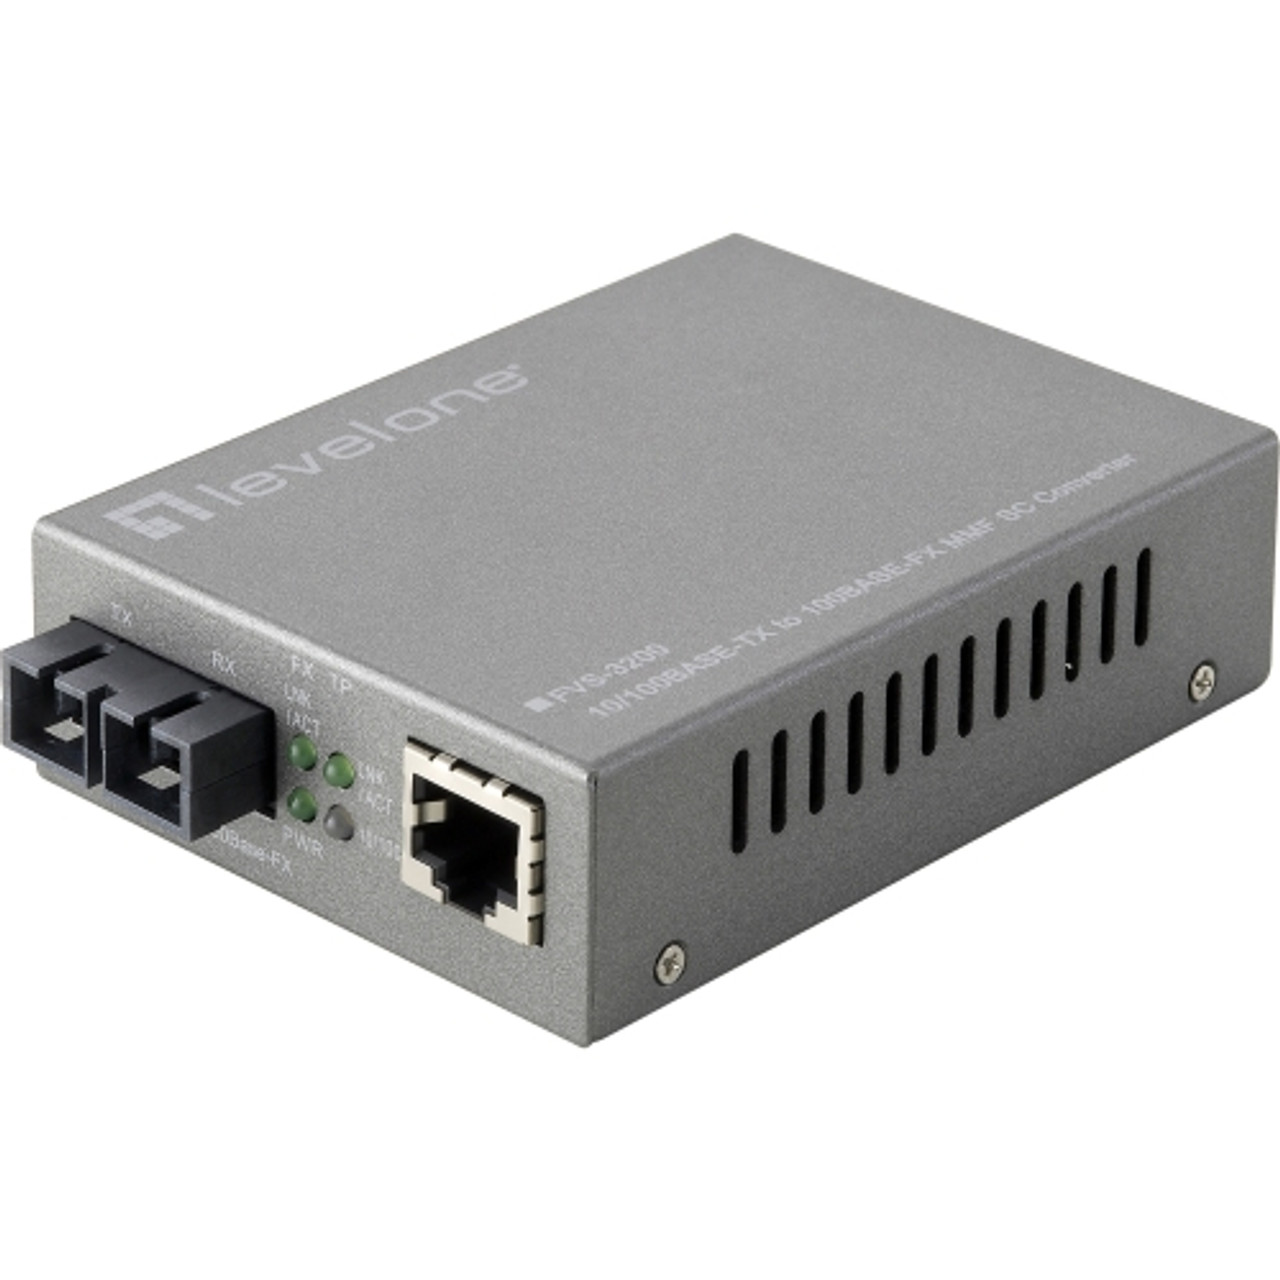 FVS-3200 LevelOne Web Smart 10/100 Based TX to 100FX MMF SC Media Converter Web Smart Media converter, 10/100 Based TX to 100FX MMF SC